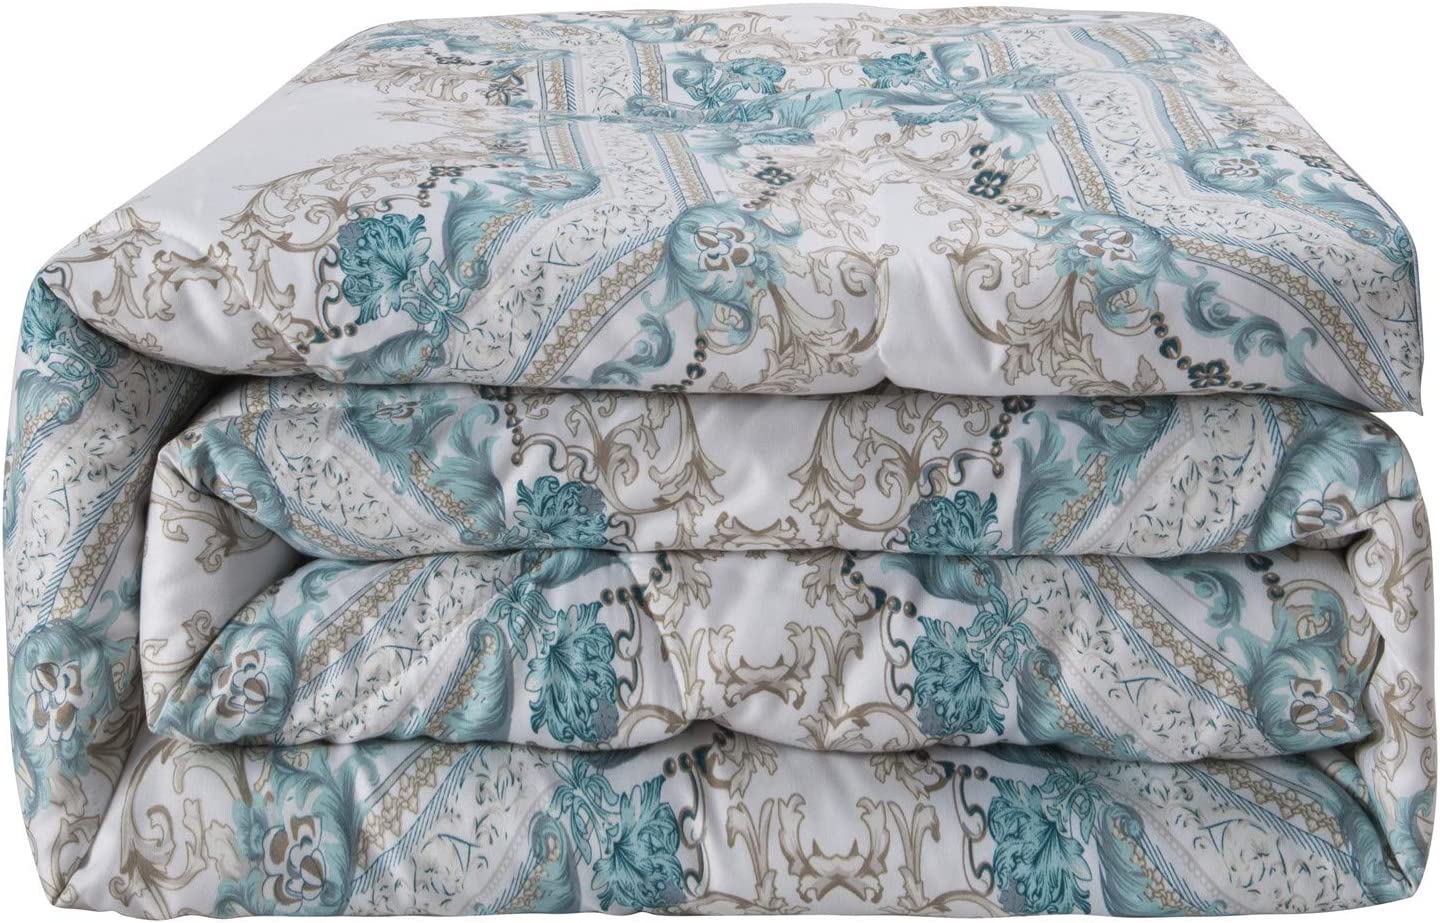 Shatex Bedding Comforter Sets 2 Pieces All Season Bedding Twin Bed Comforter Set –Ultra Soft 100% Microfiber Polyester Blue Textured Comforter with 1 Pillow Sham